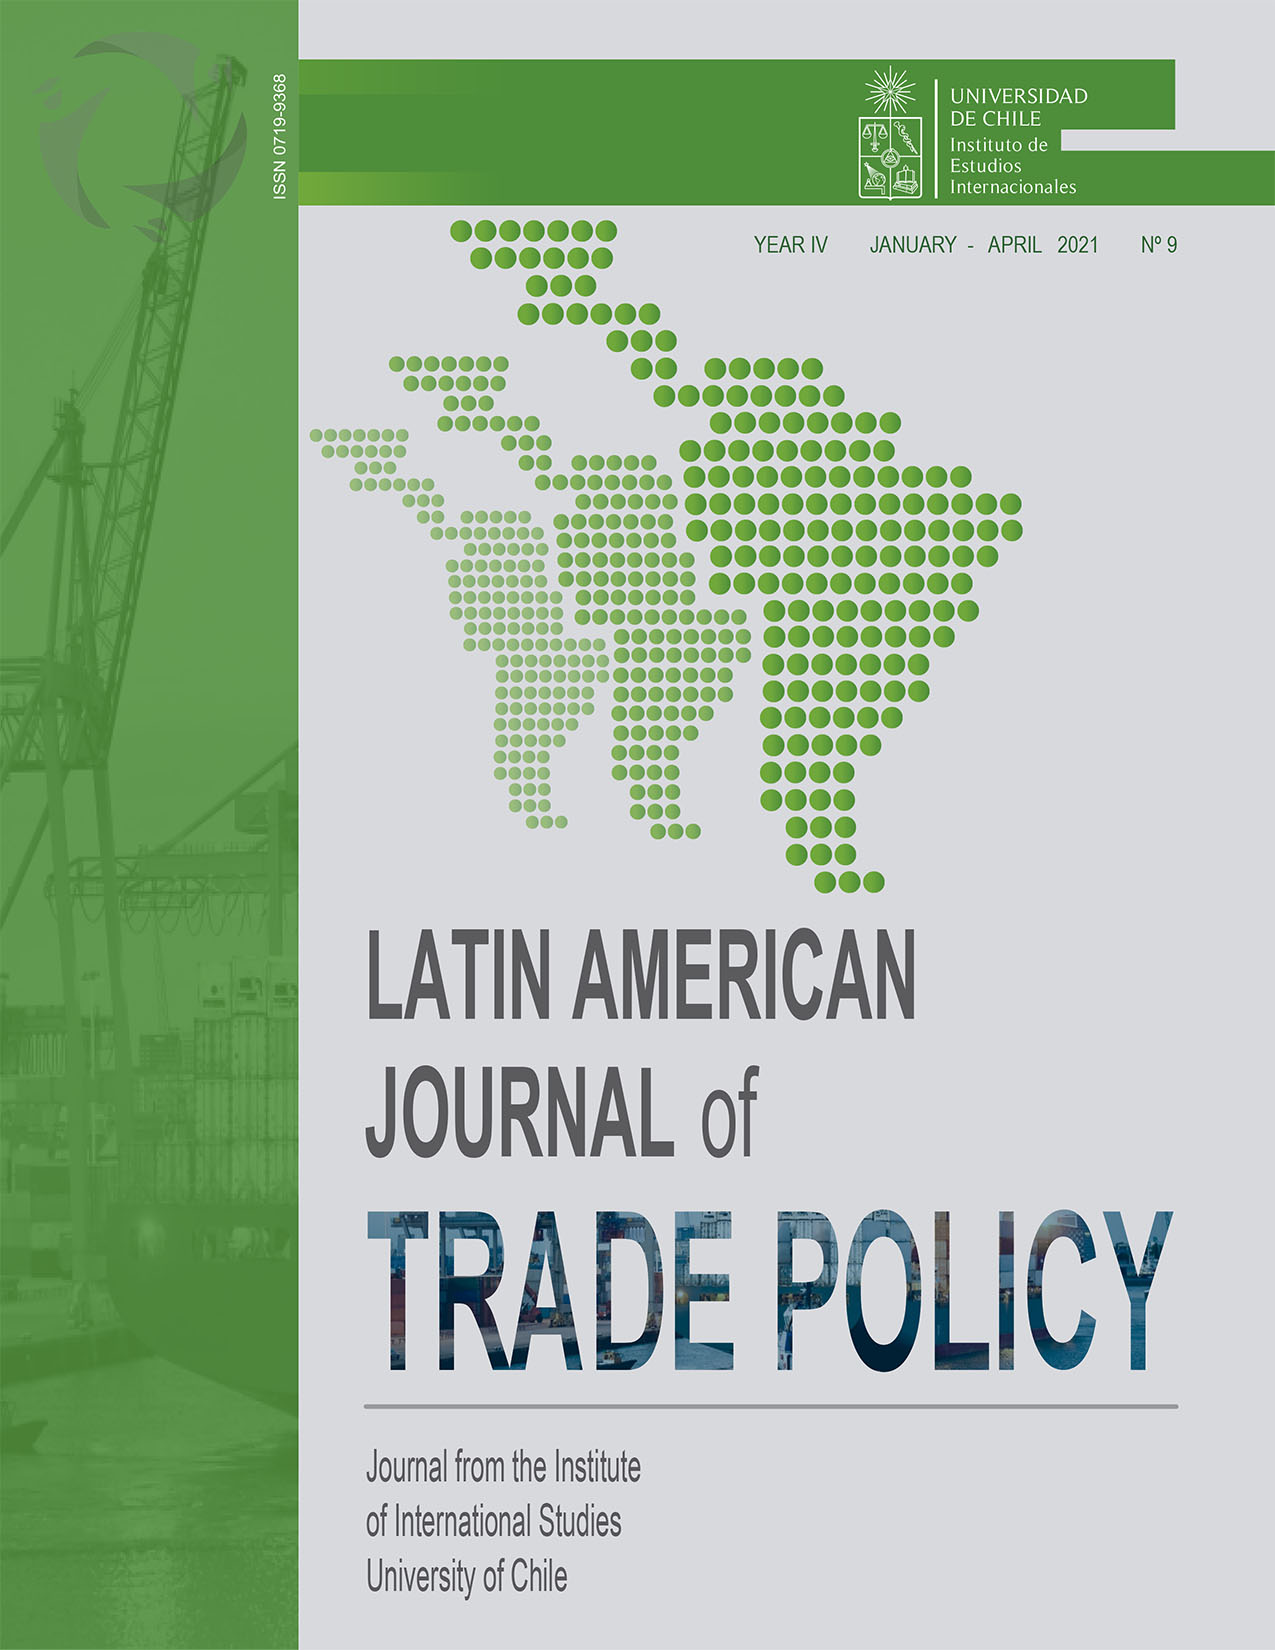 							View Vol. 4 No. 9 (2021): Latin American Journal of Trade Policy
						